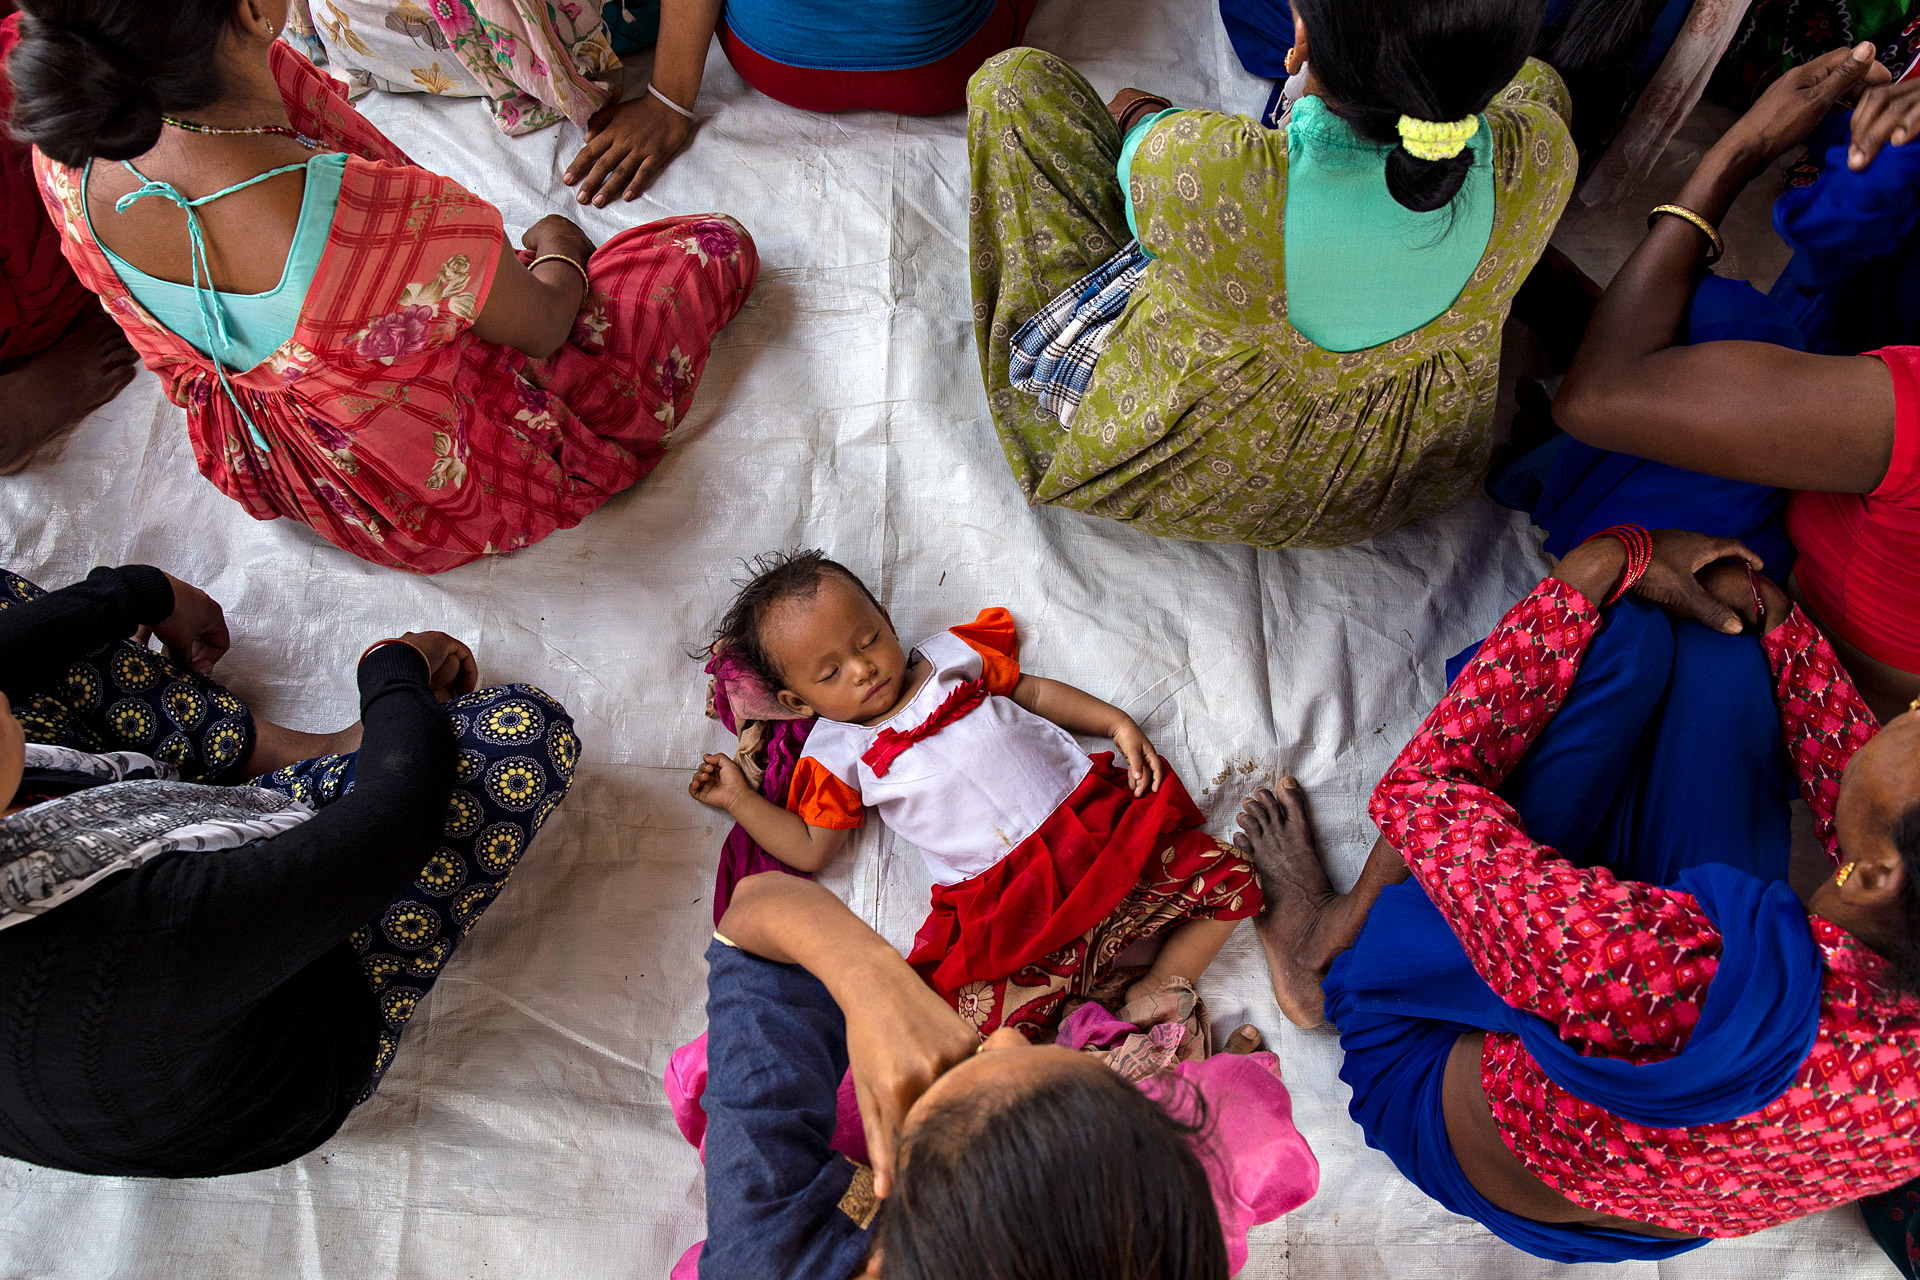 A baby is sleeping on the ground in Nepal. Women sit around the baby.